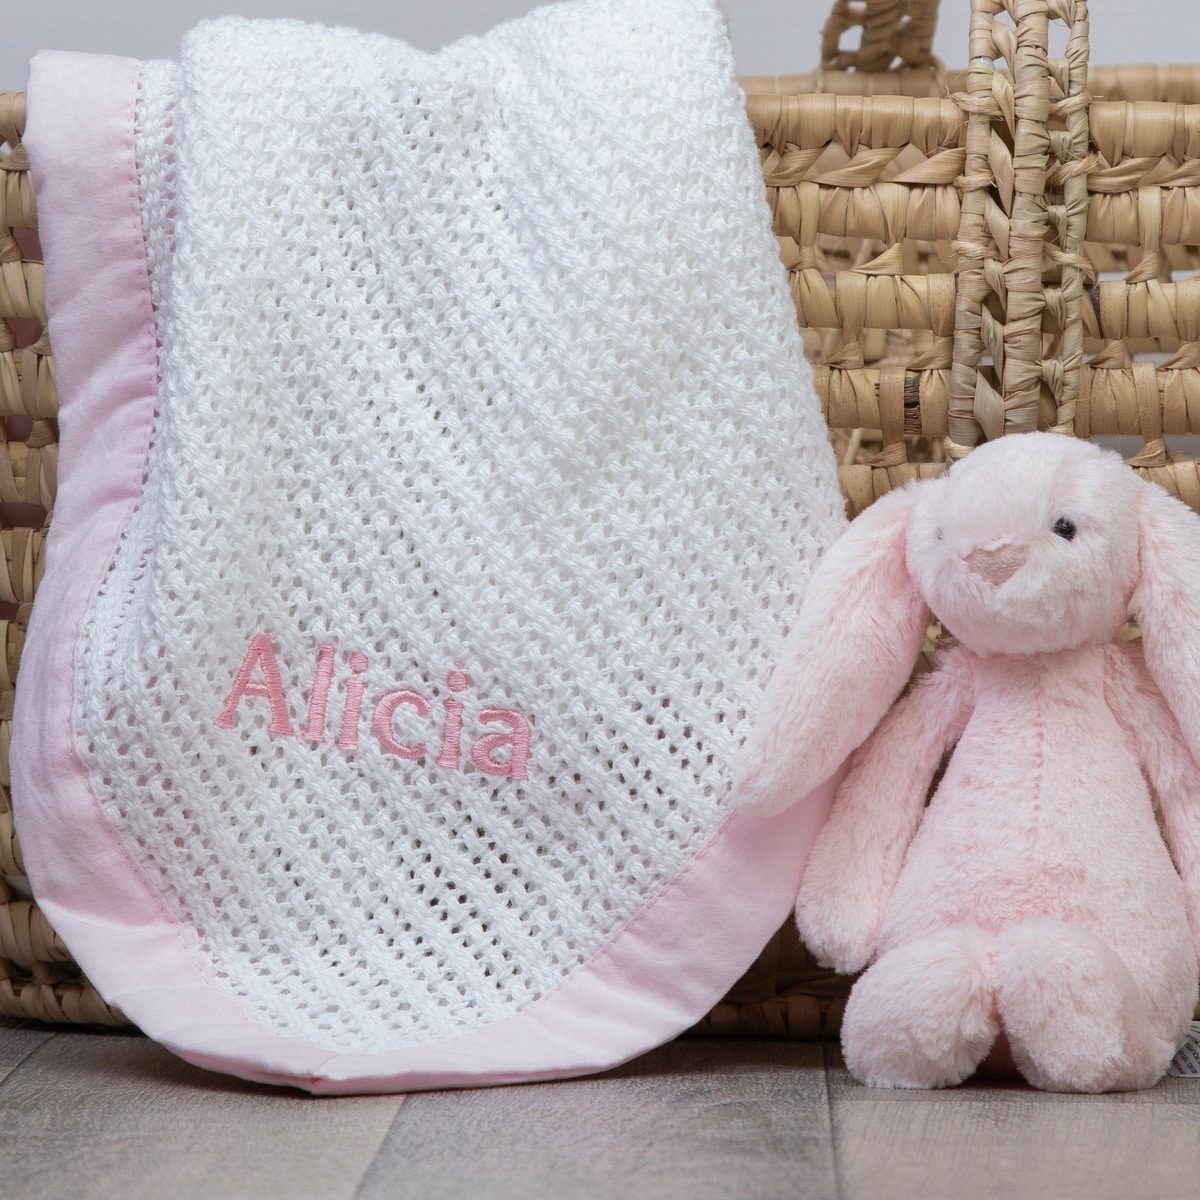 Ziggle personalised white cellular baby blanket with pink trim Birthday Gifts 2